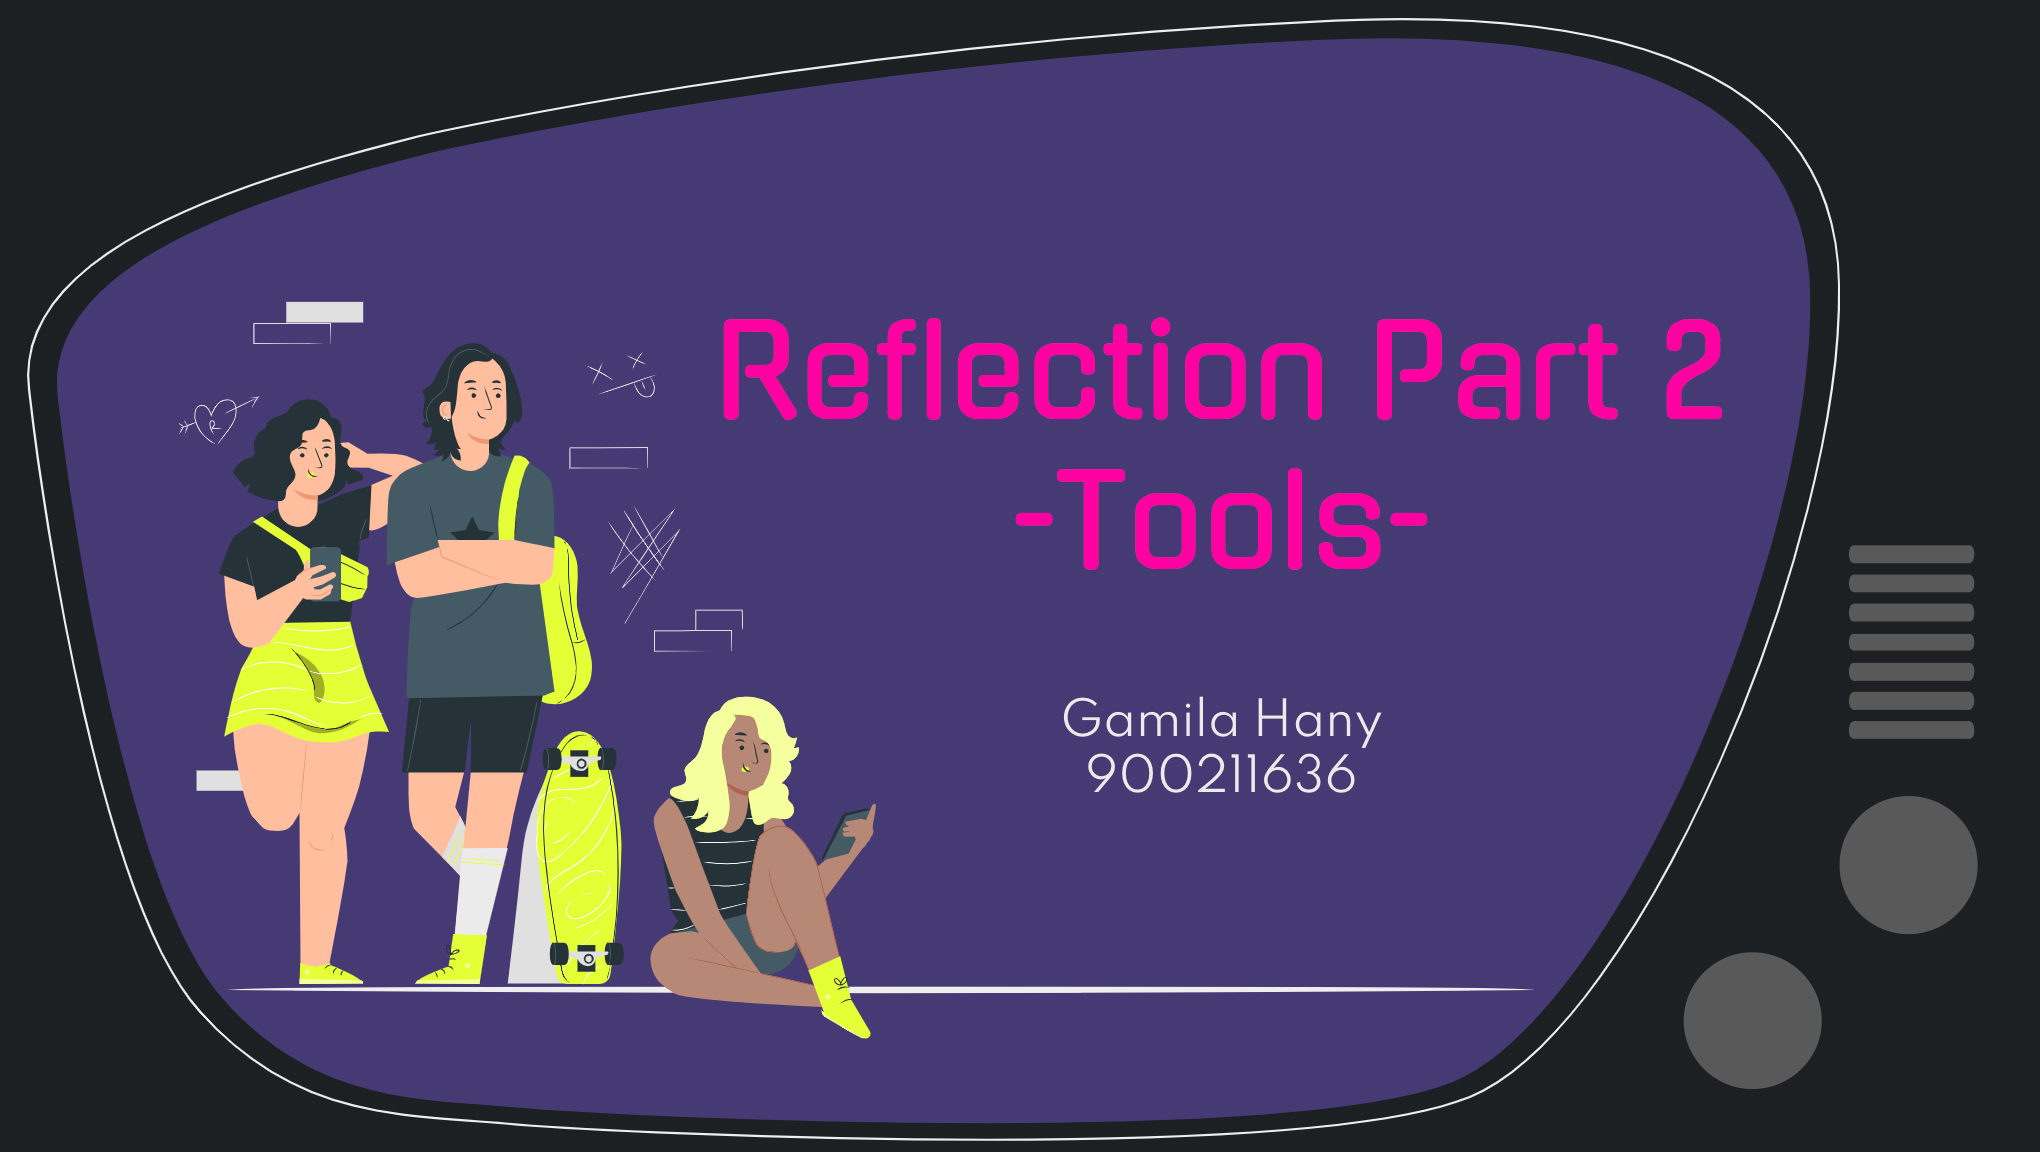 The first slide of my presentation, includes the title "Final Reflection Part 2 - Tools-"